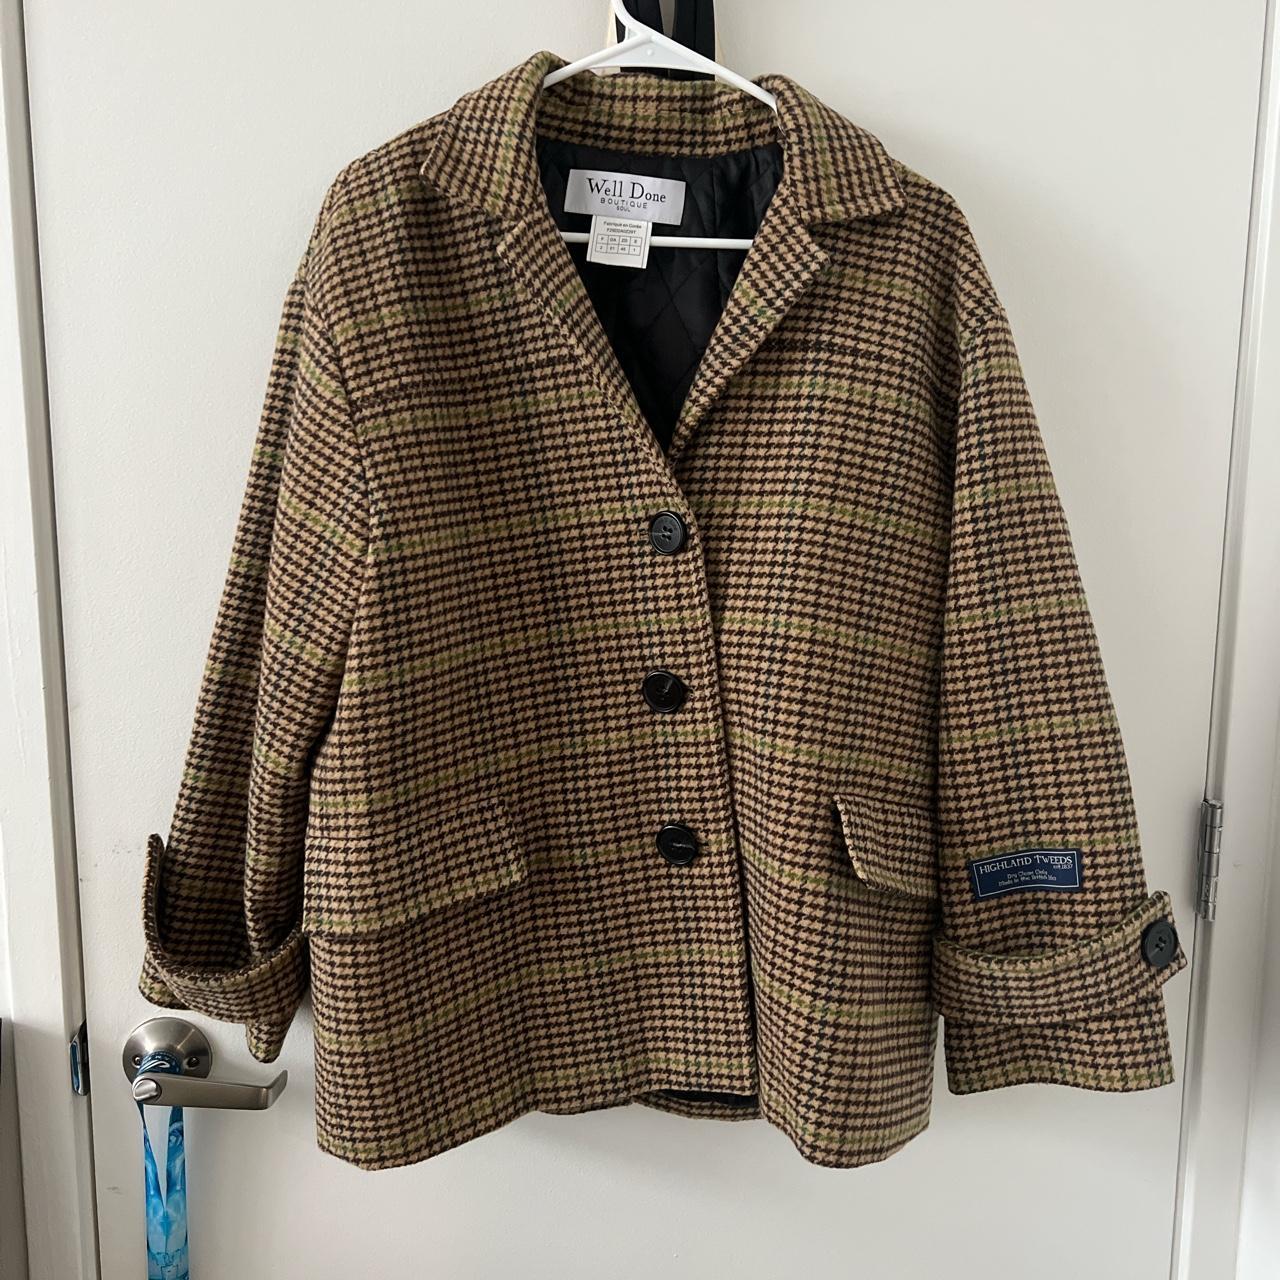 WE11DONE OVERSIZED PLAID WOOL JACKET Open to... - Depop